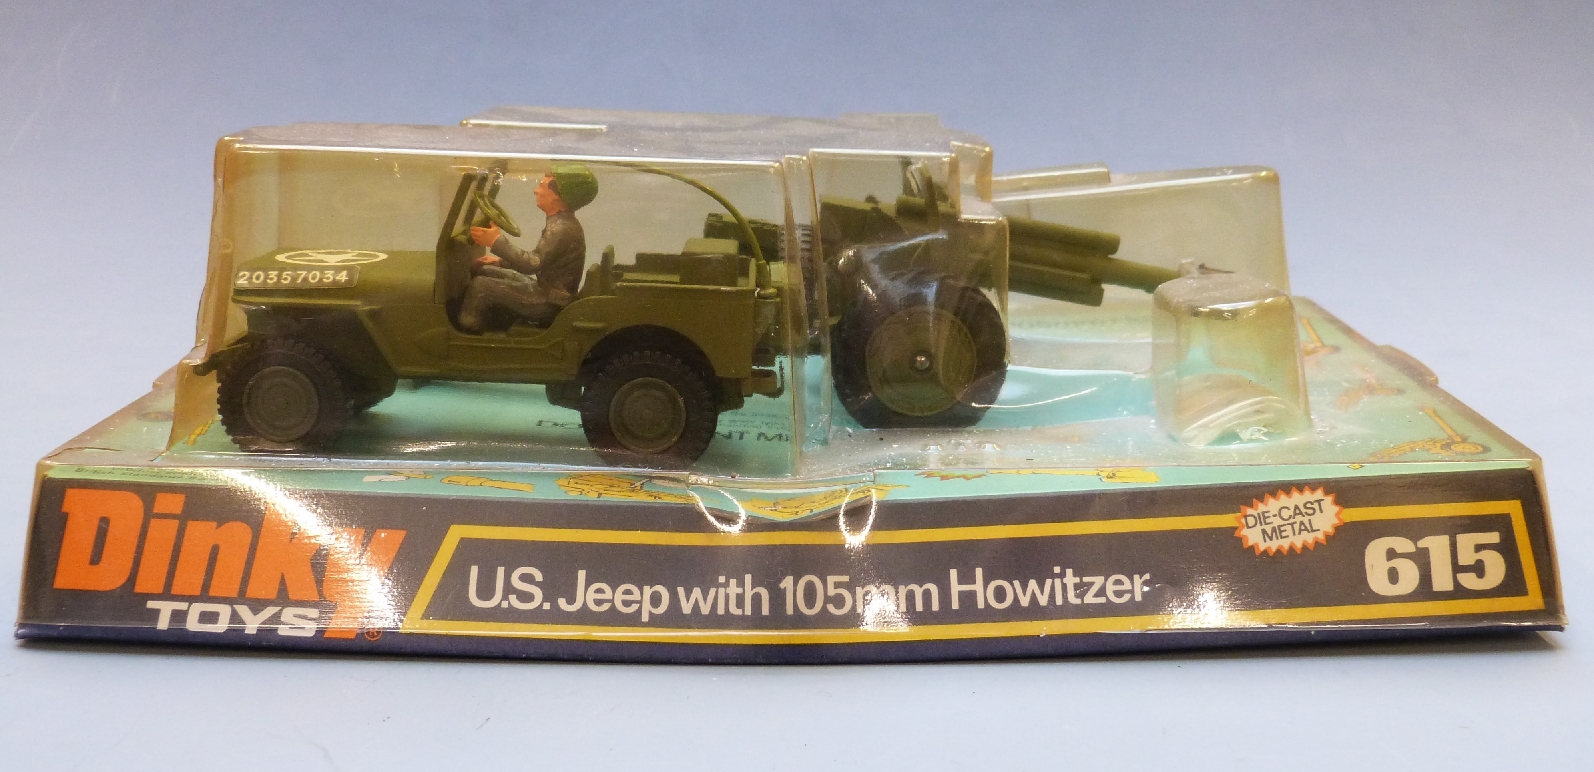 Two Dinky Toys diecast model military vehicles US Jeep with 105mm Howitzer 615 and Volkswagen KDF - Image 6 of 9